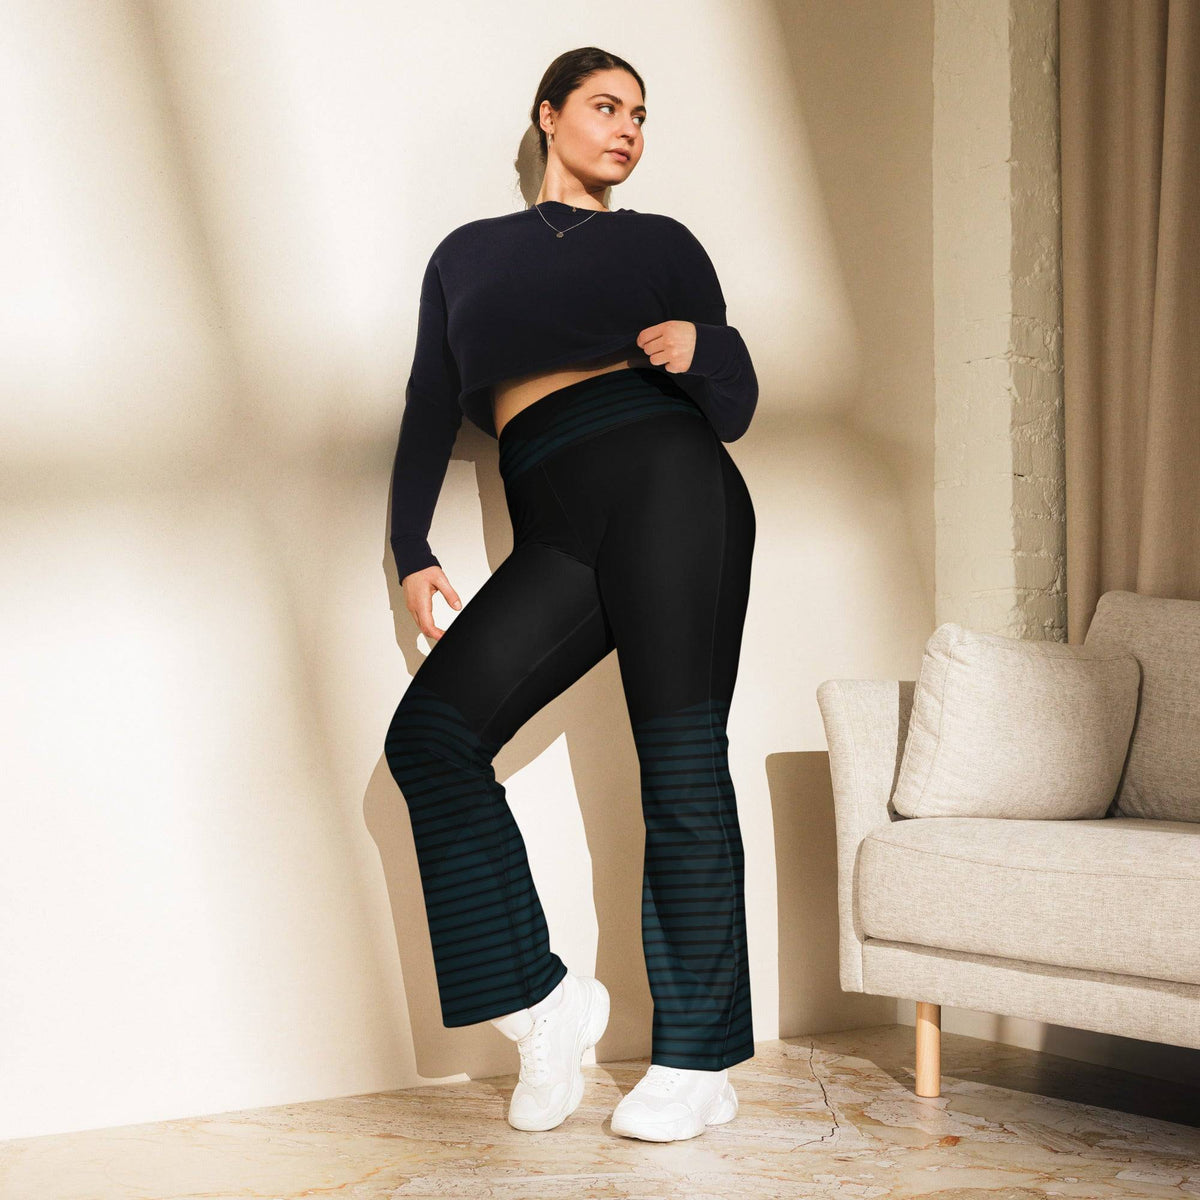 Black Flare Leggings.  Revive Wear&#39;s curve-hugging black flared leggings feature an on-trend flared cut that lifts and shapes. Shop from small to plus sizes with free shipping.